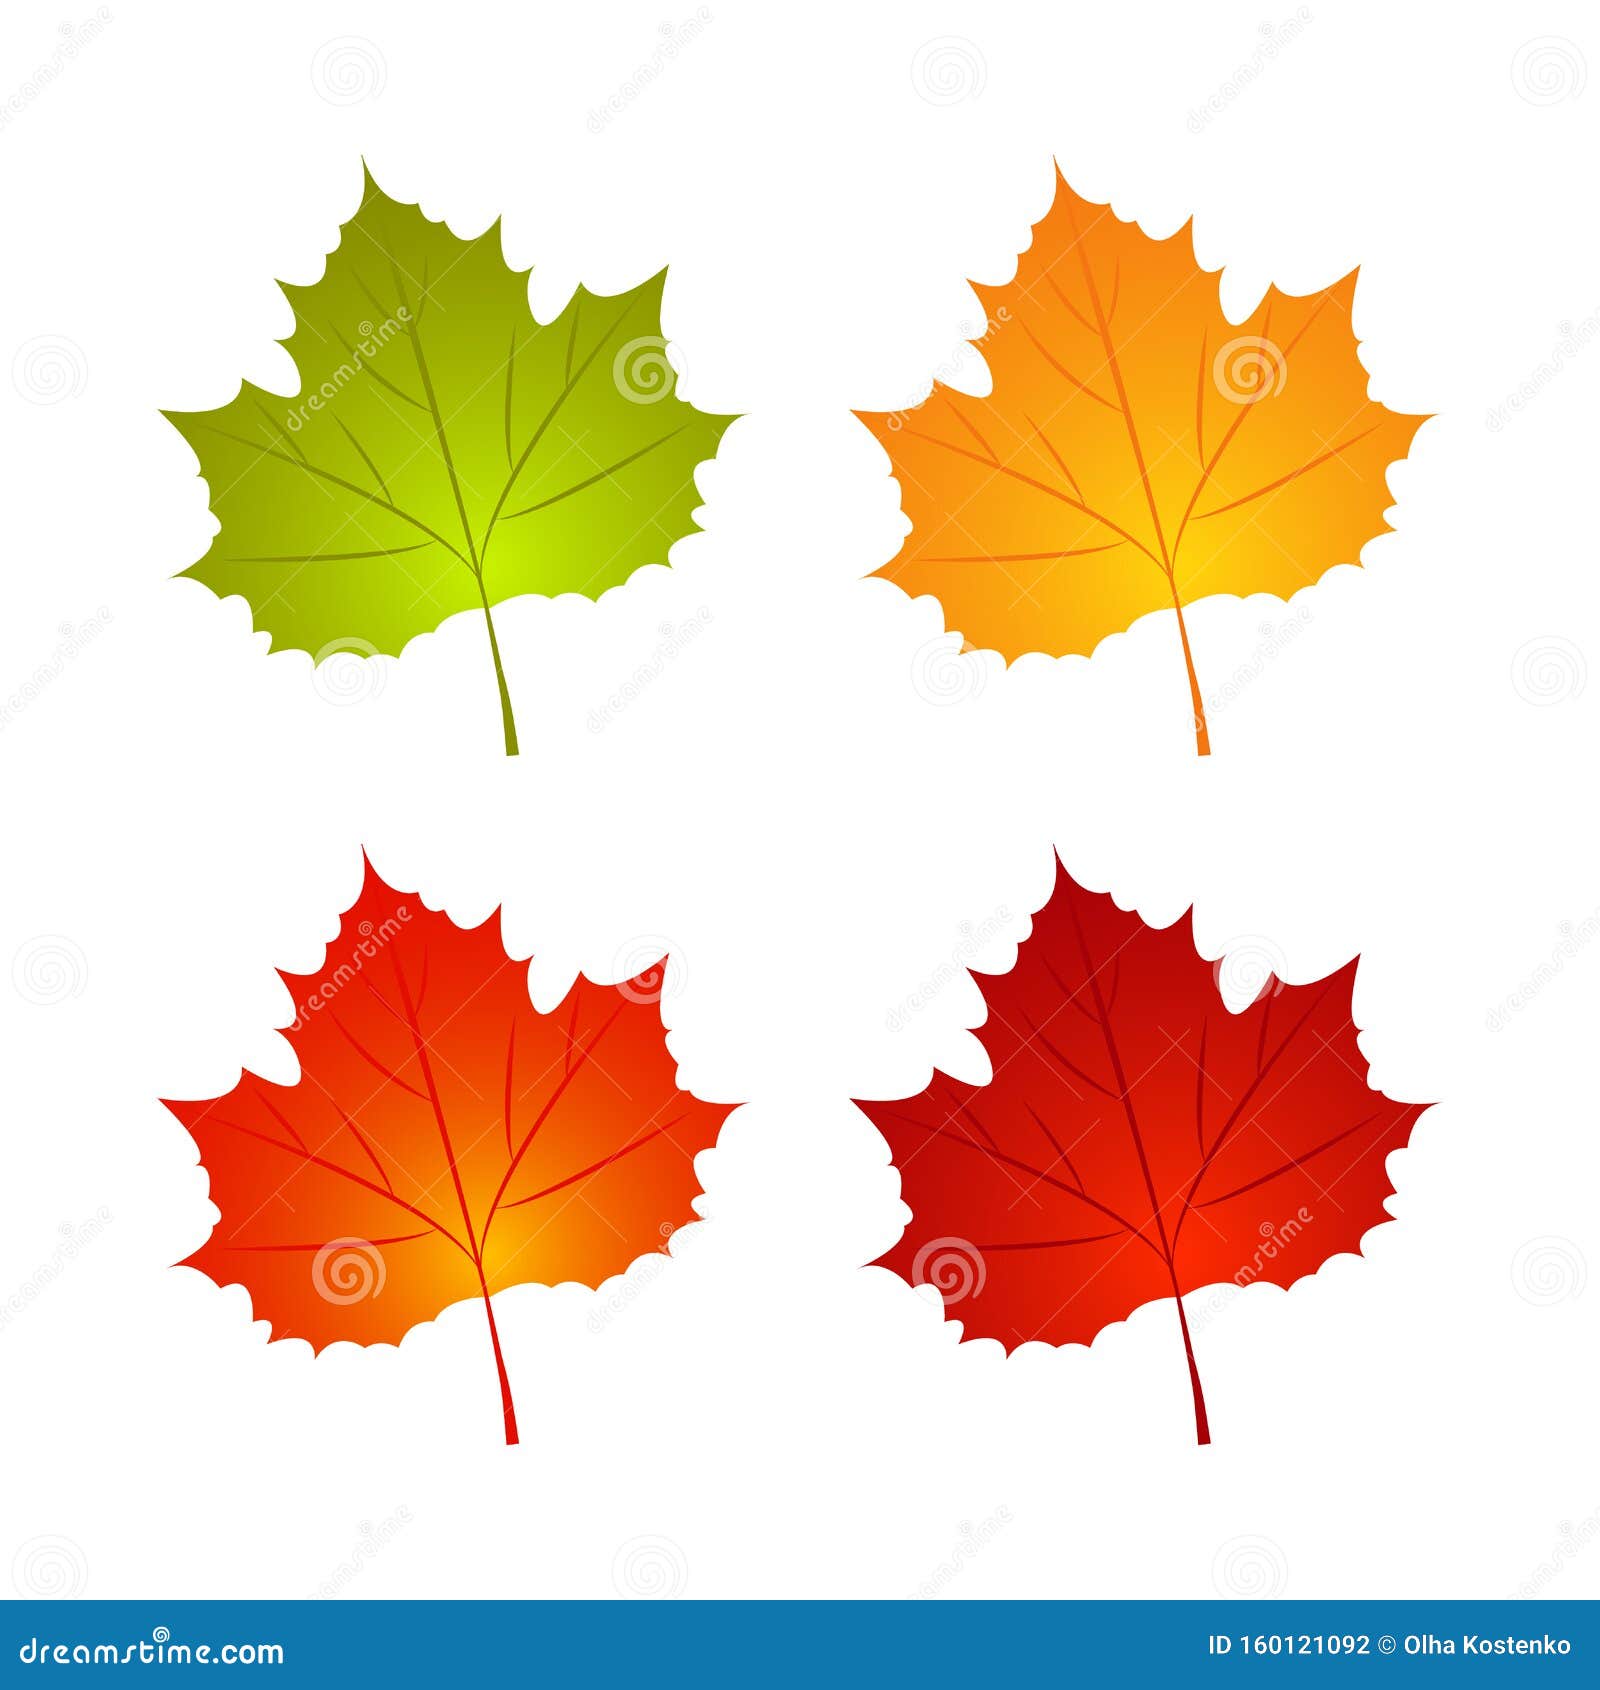 Colorful Autumn Leaves - Maple Leaf Style Fall Plant / Tree Clip Art